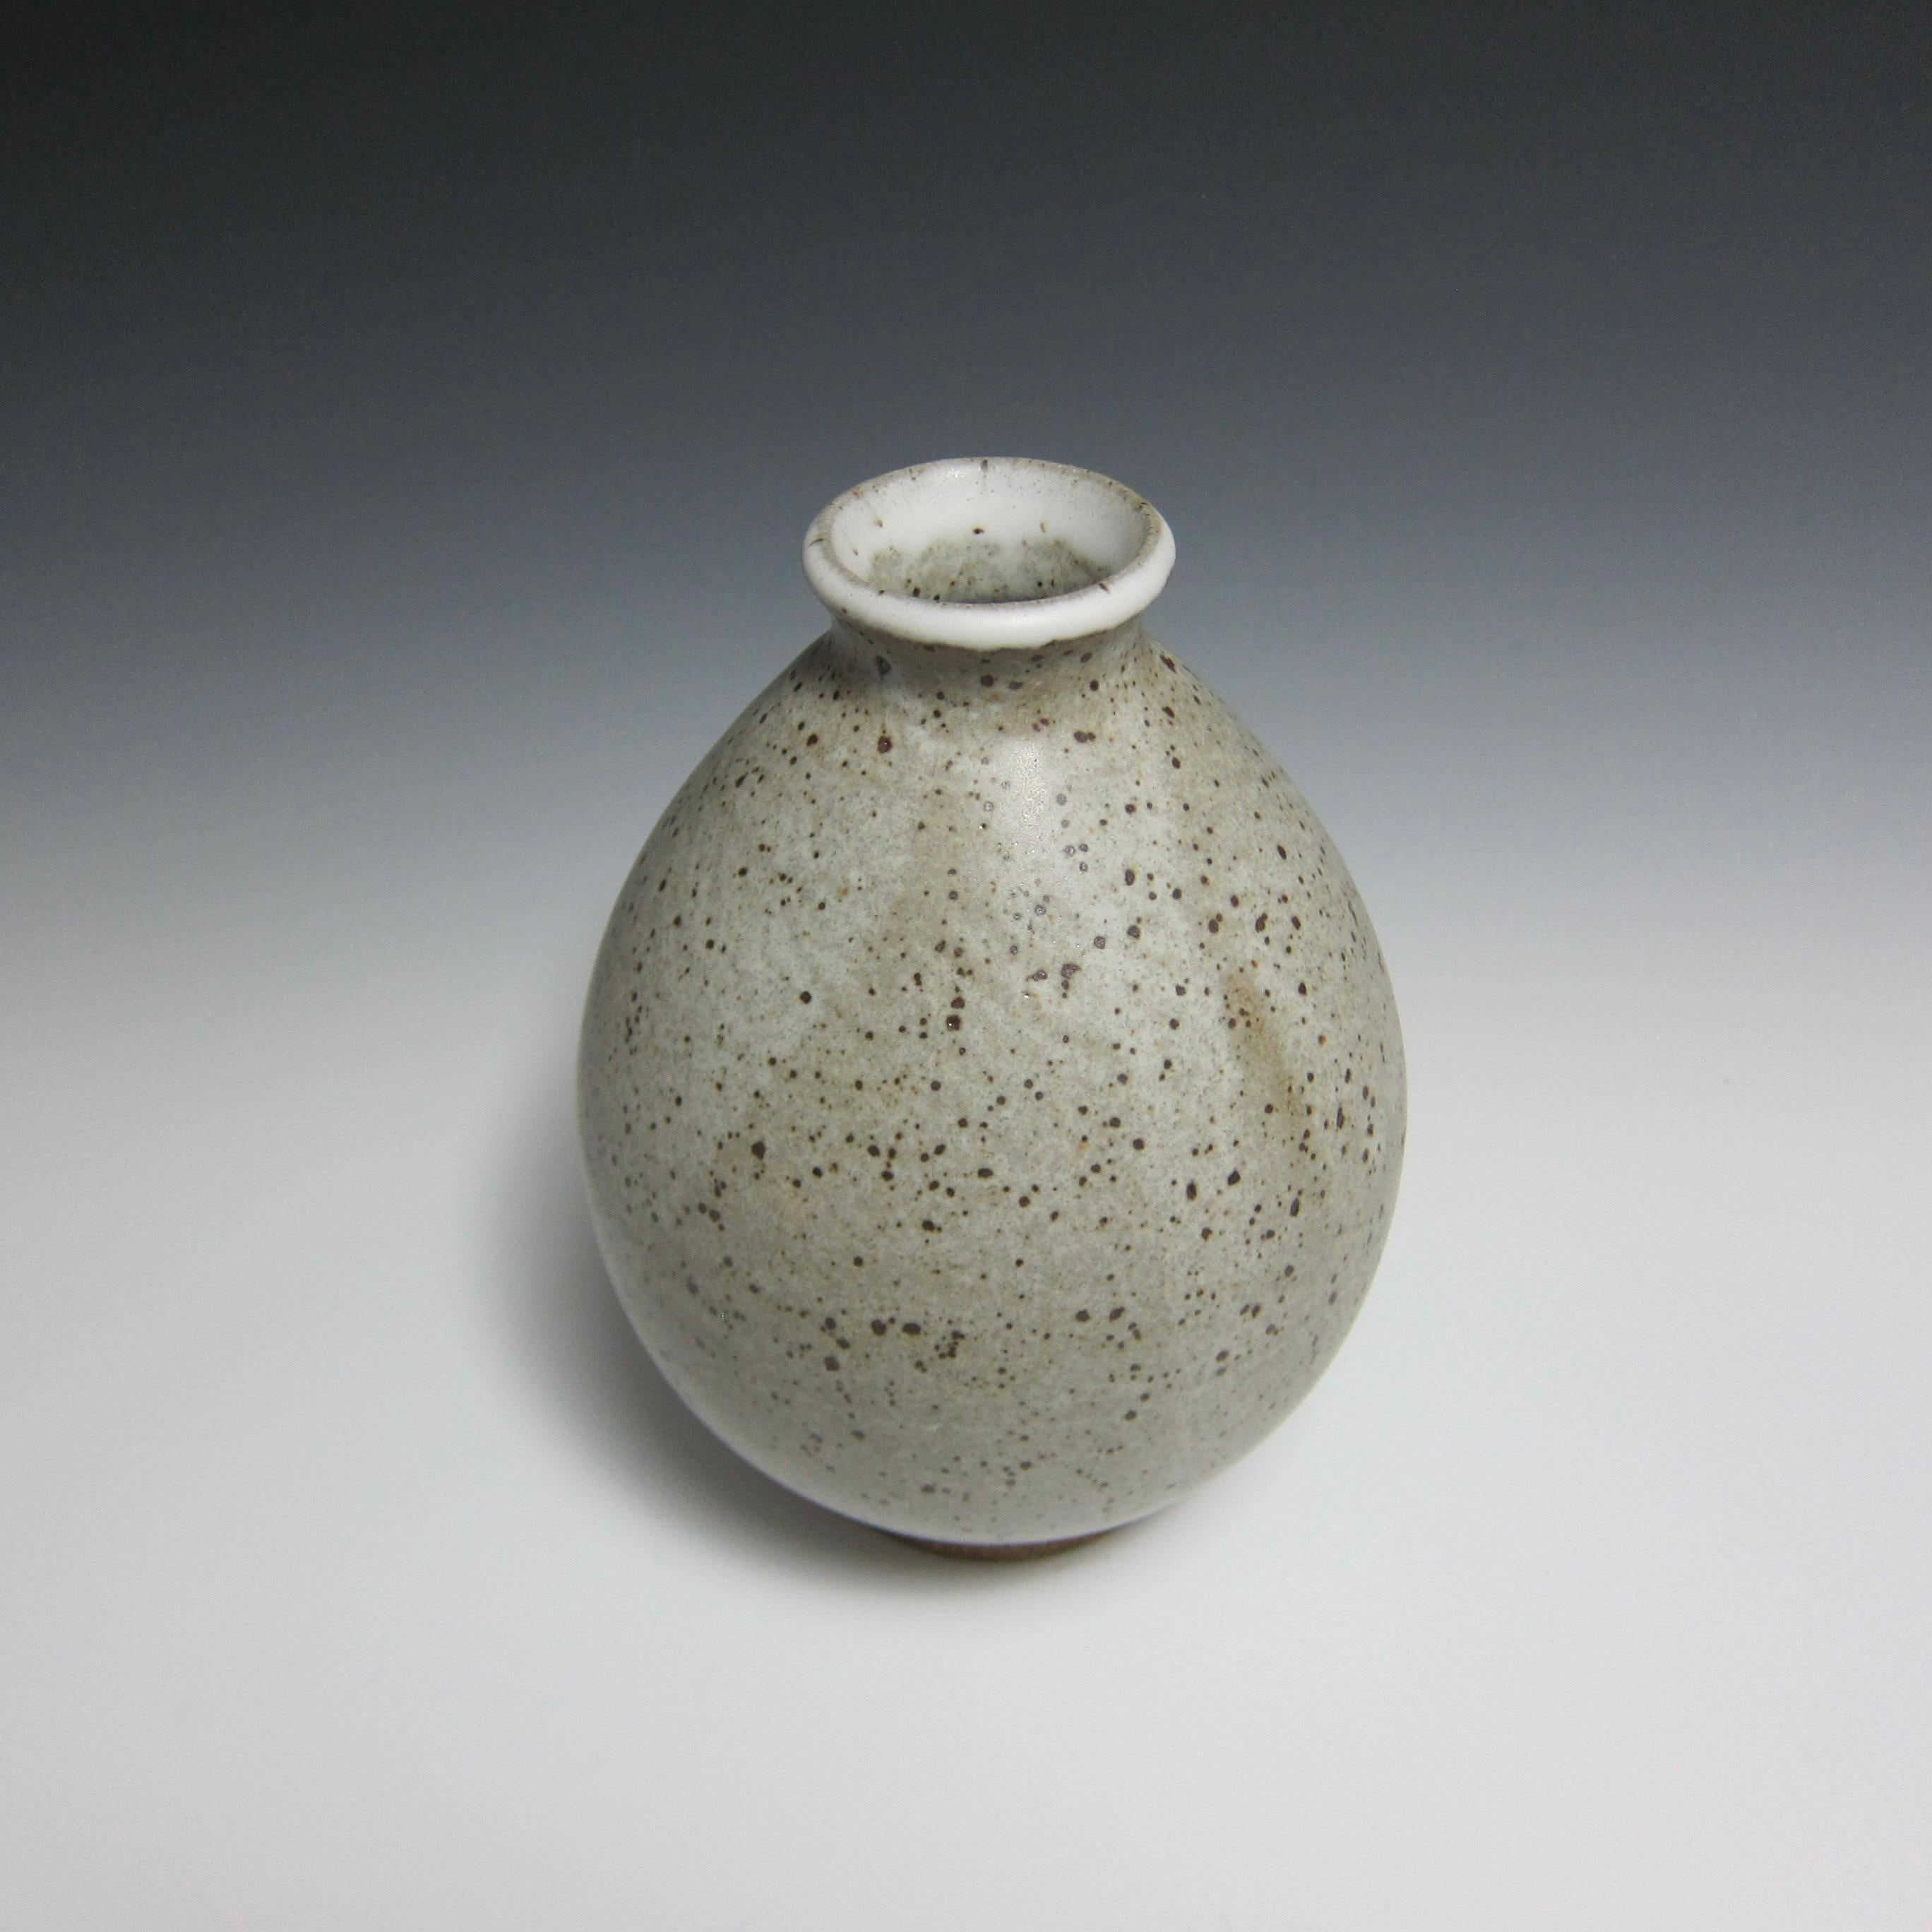 Speckled White Flower Bottle / Ceramic Vase by Jason Fox In New Condition For Sale In Burbank, CA